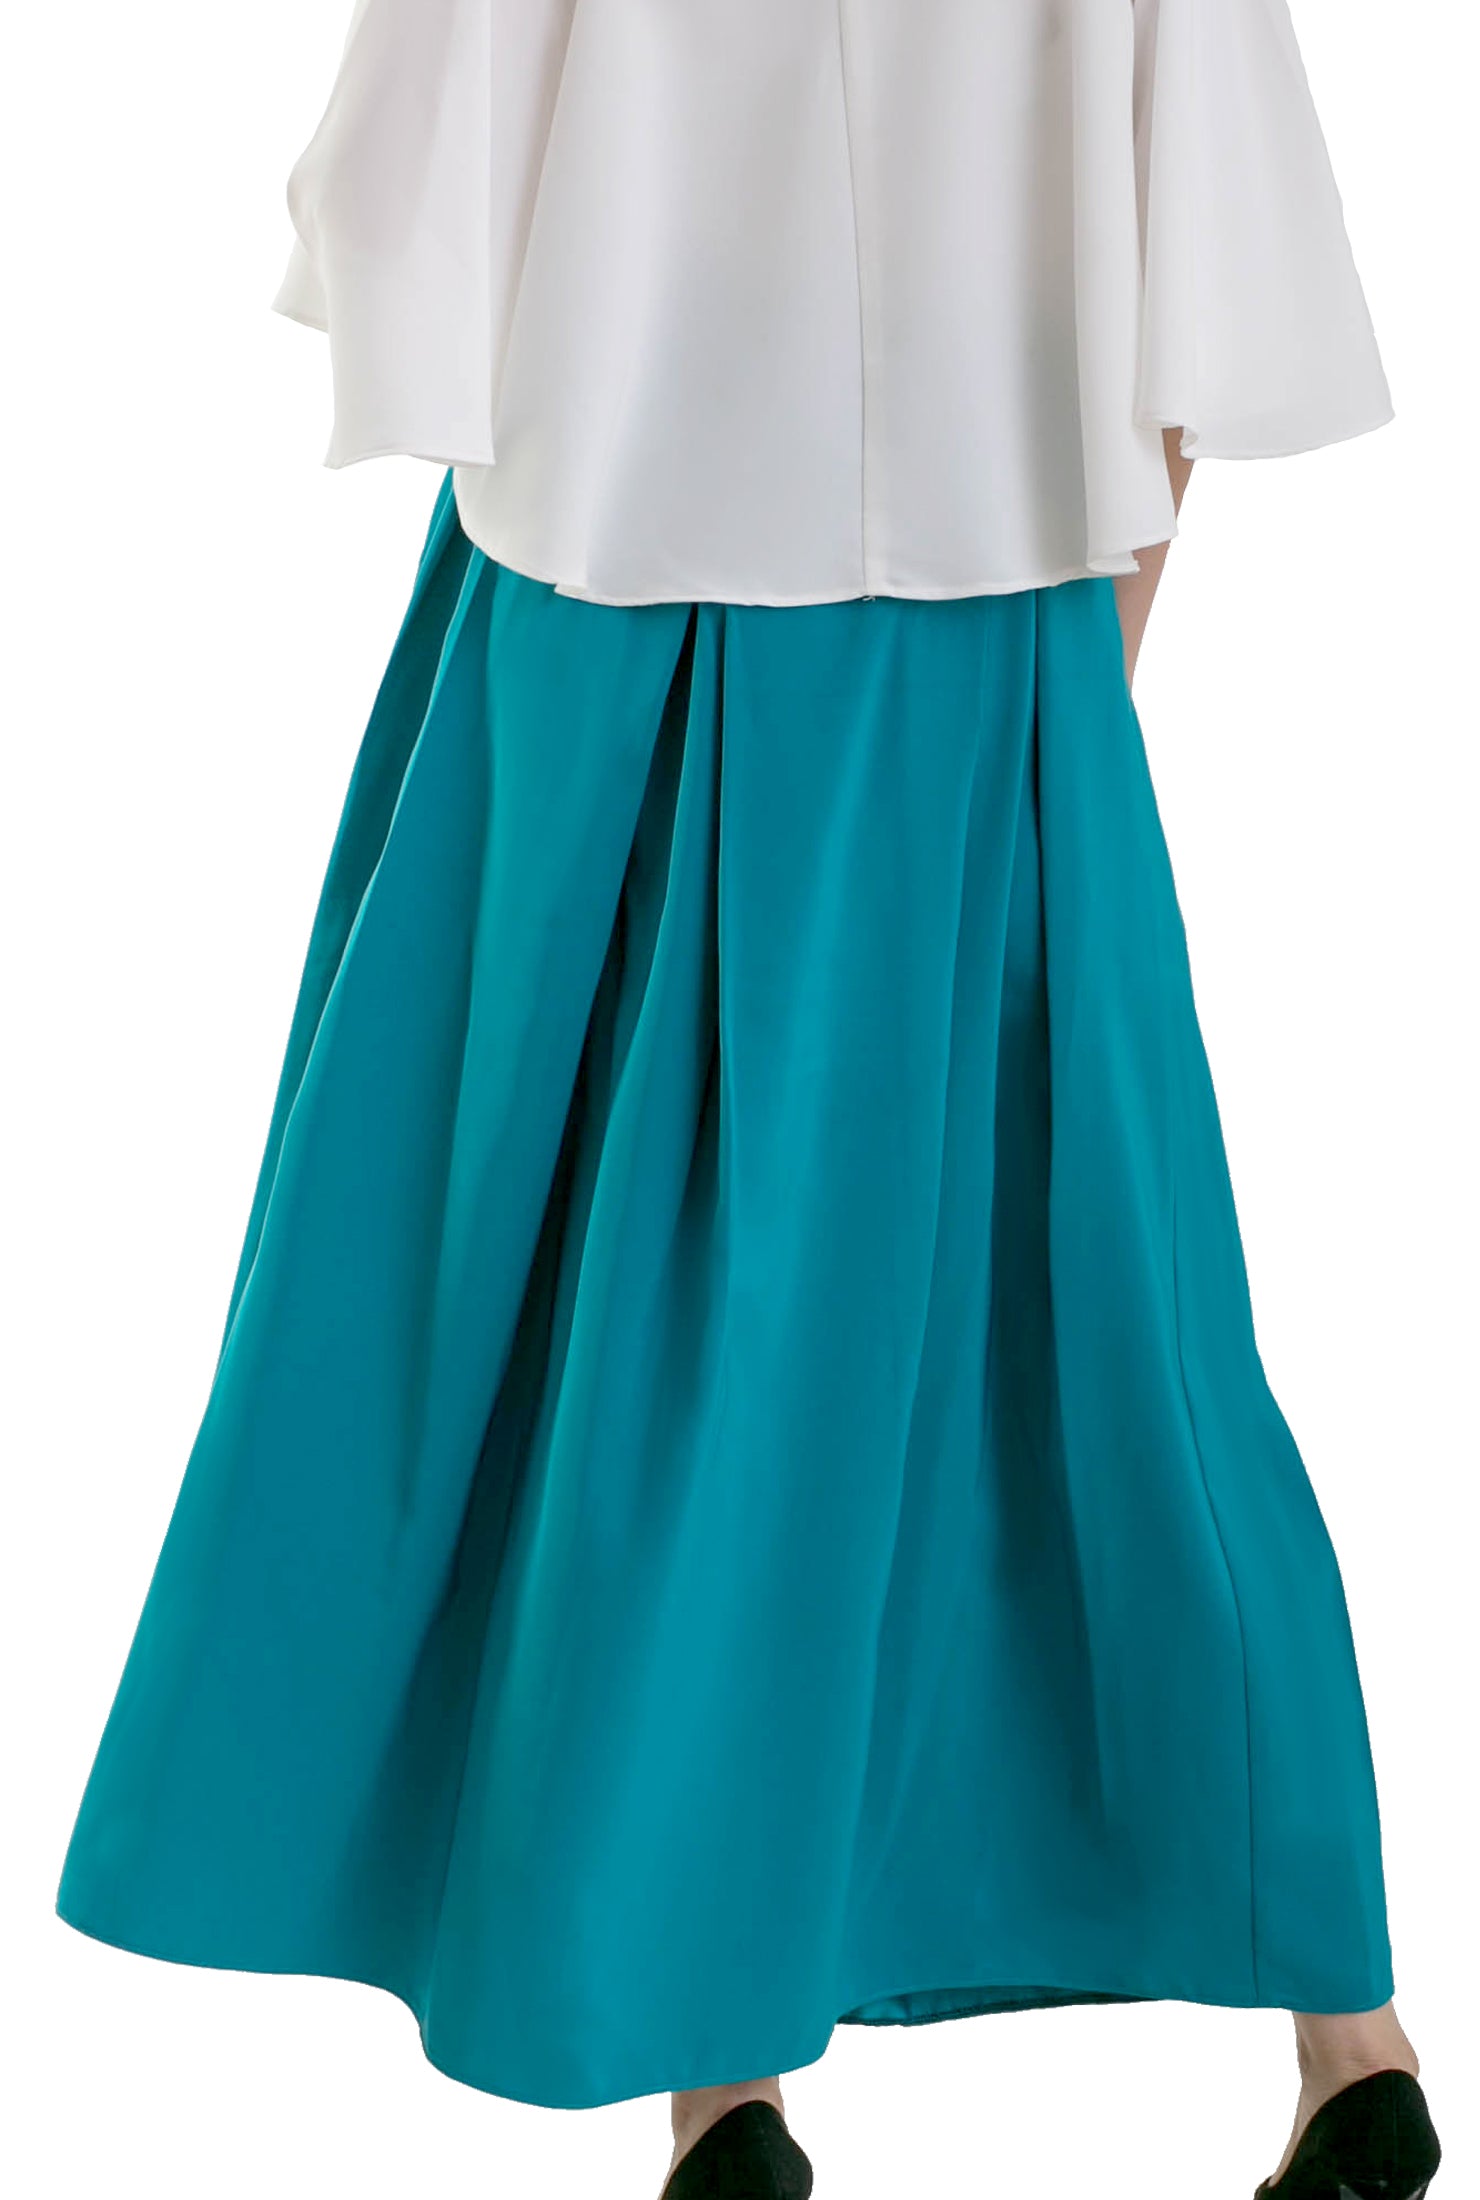 The Box pleated Skirt - Turquoise